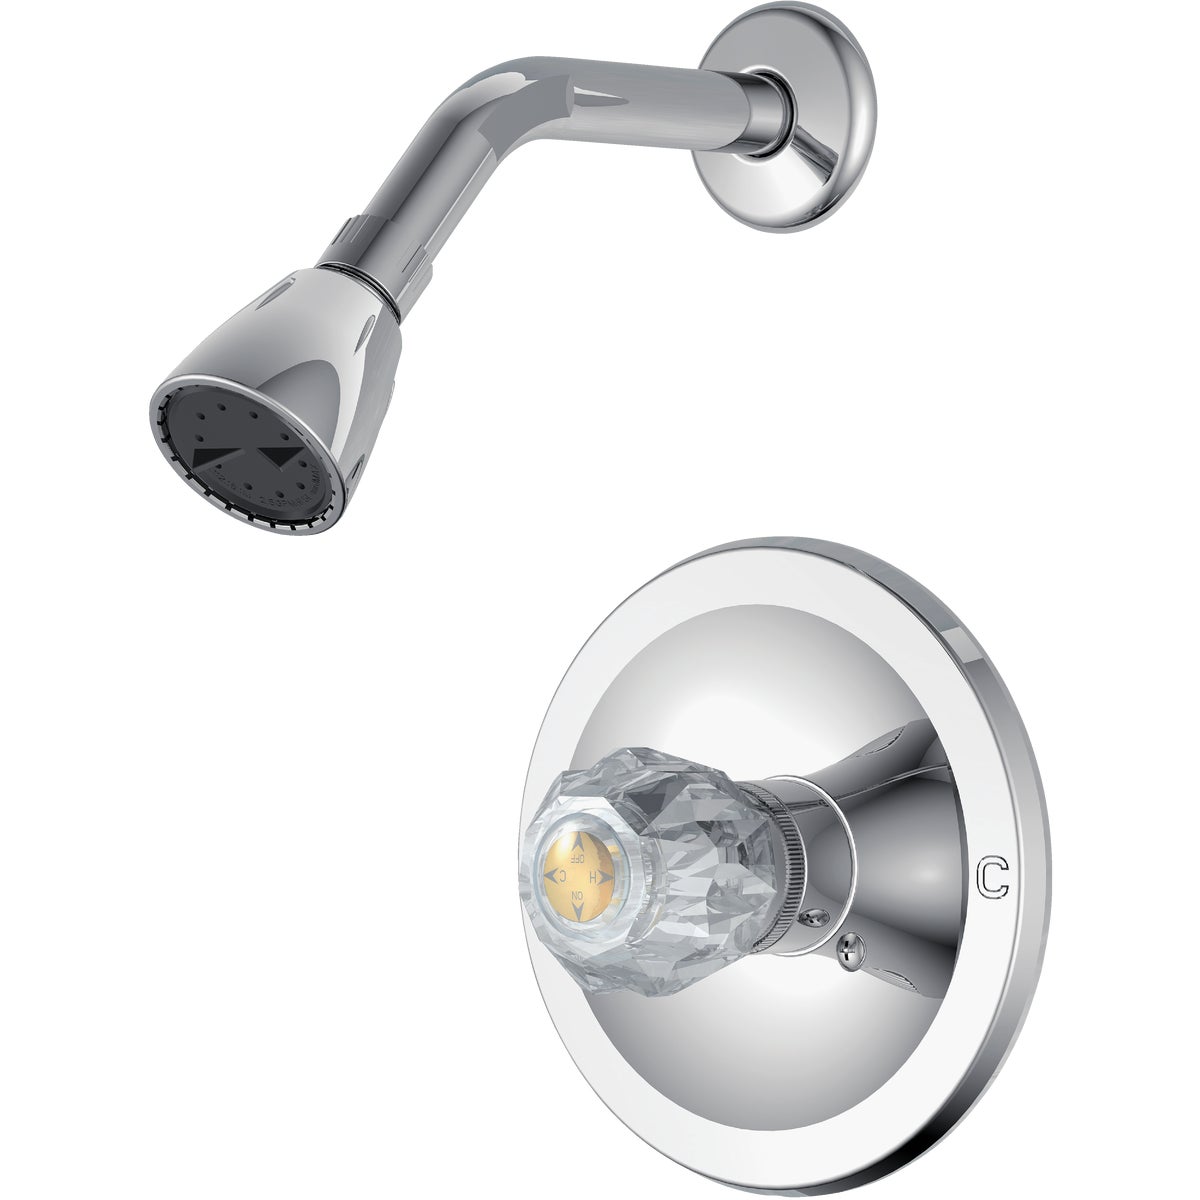 Item 400705, Single handle shower faucet with acrylic handle. 1.